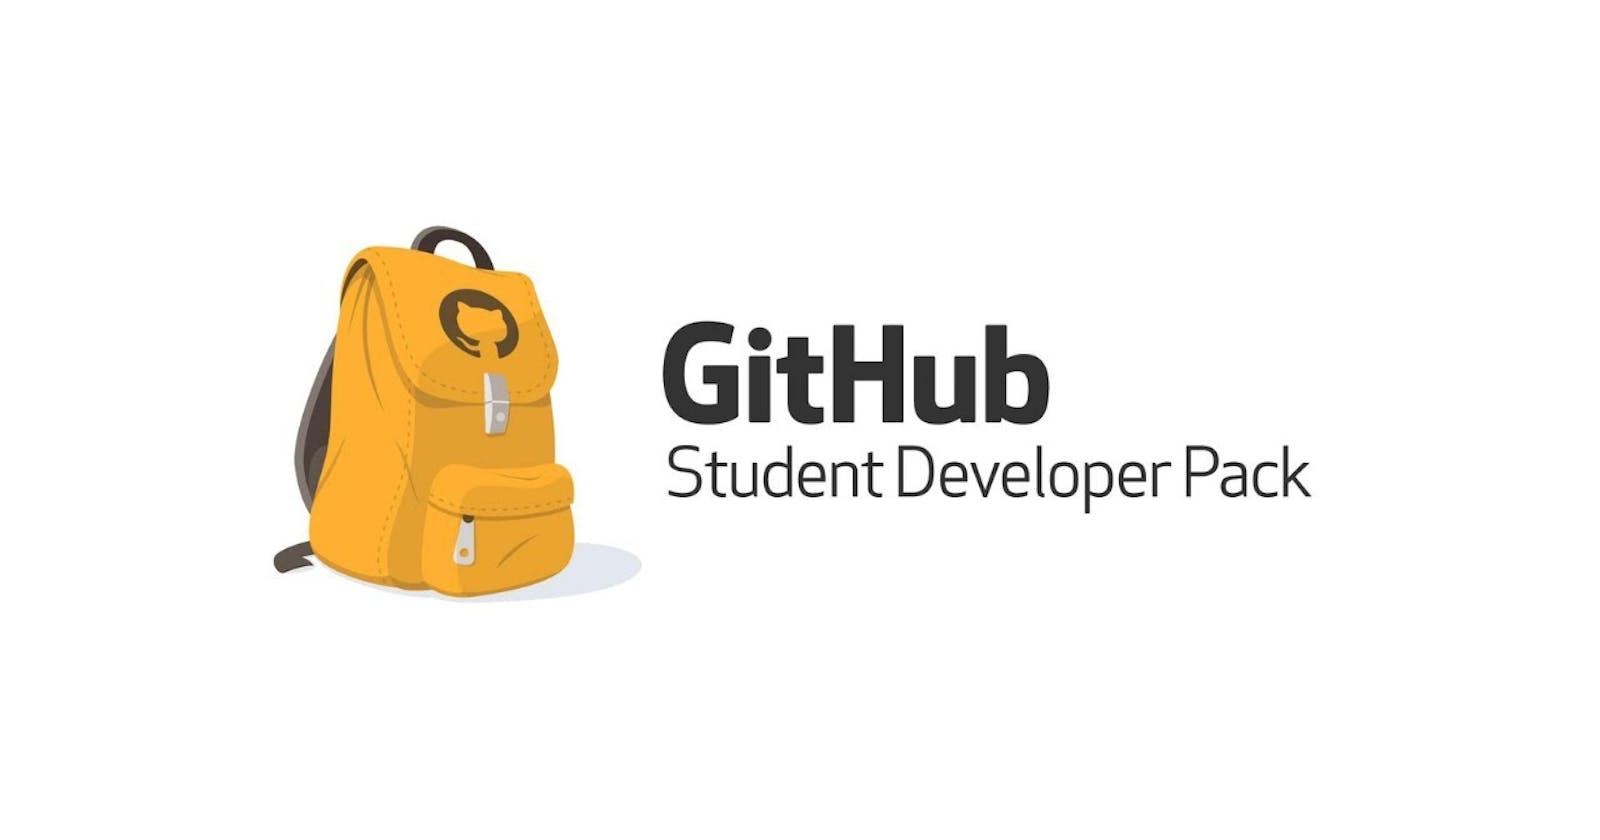 GitHub Student Developer Pack: A Comprehensive Guide to Unlocking Its Perks.